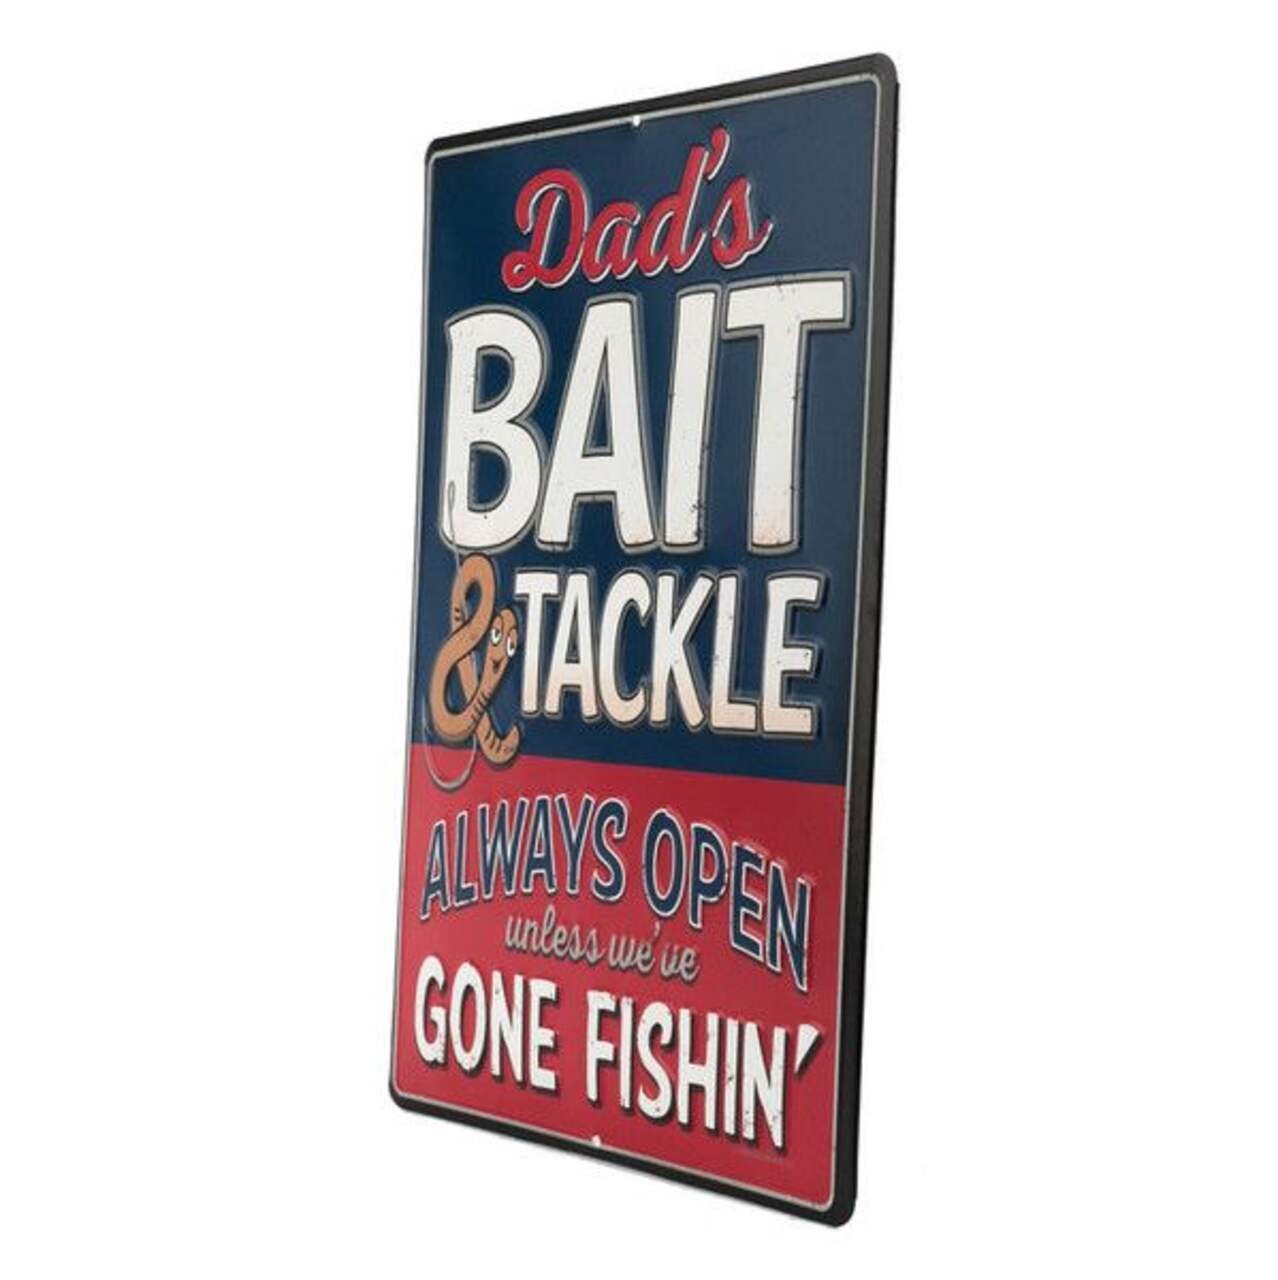 https://media-www.canadiantire.ca/product/playing/hunting/hunting-accessories/3751671/dad-s-bait-tackle-emb-metal-sign-0fe183bf-a5eb-4e3b-a710-c3a120011ac3-jpgrendition.jpg?imdensity=1&imwidth=640&impolicy=mZoom